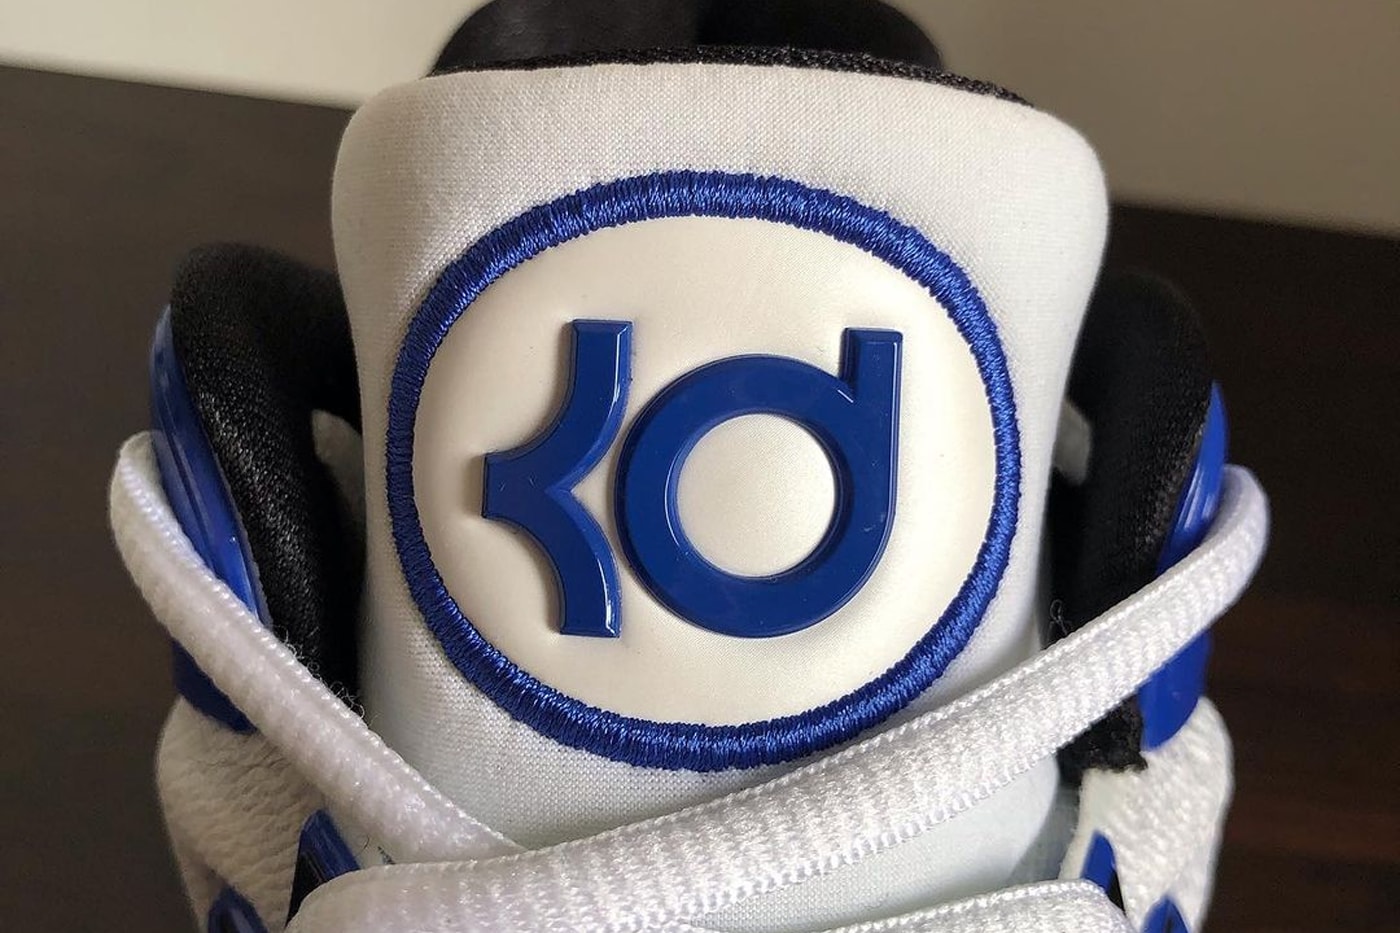 First Look at the Nike KD 17 "Penny" FJ9487-100 White/Black-Game Royal release info kevin durant first look at the shoe basketball team usa